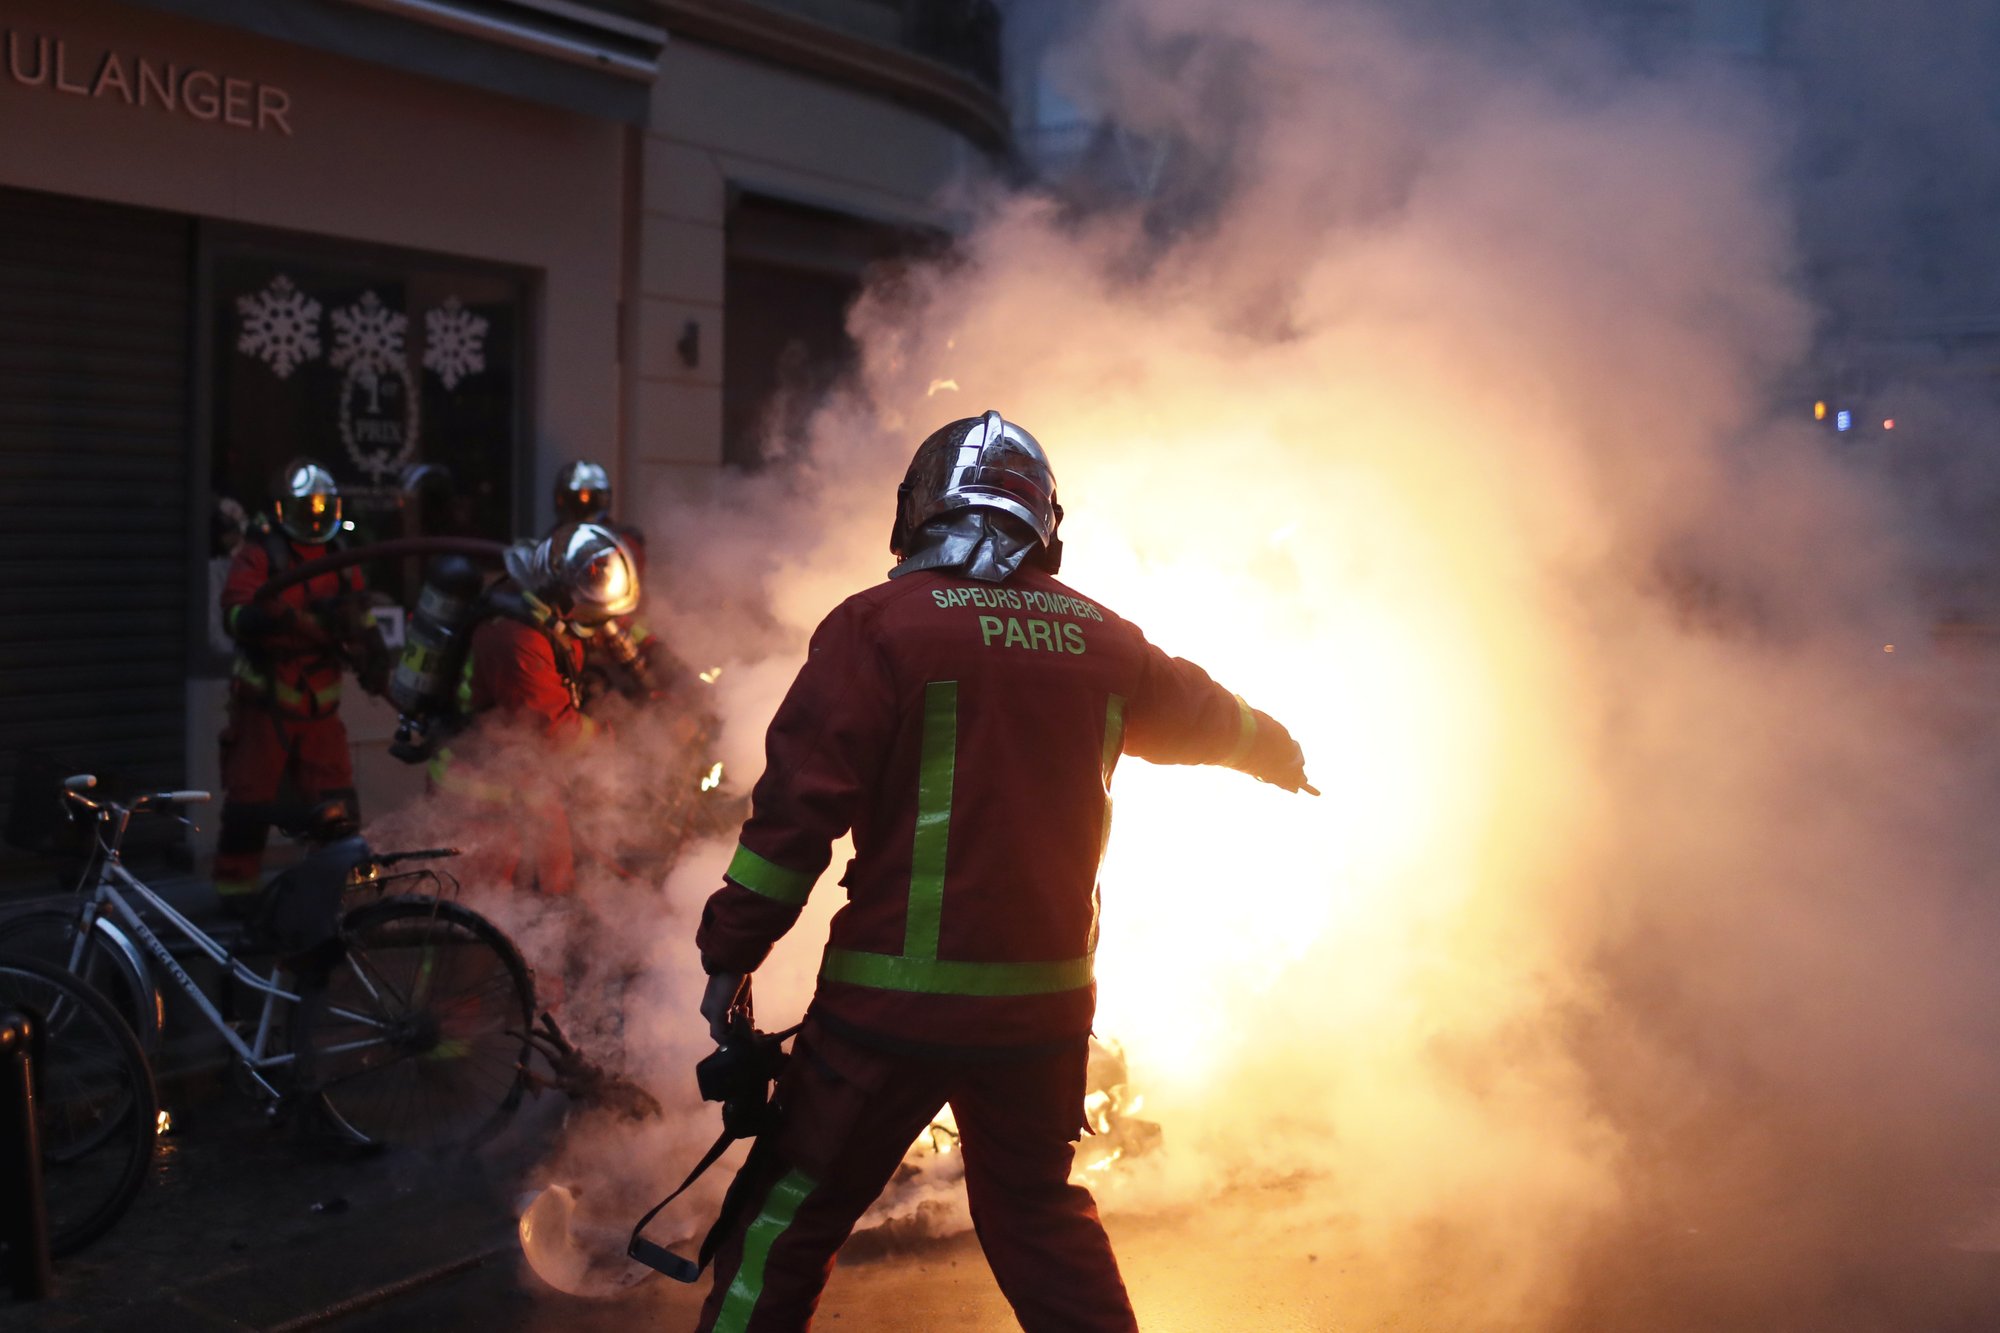 Firefighters try to extinguished a car set on fire by demonstrators during clashes with riot police, in Paris, France, on Saturday, Dec. 8, 2018. Photo: AP